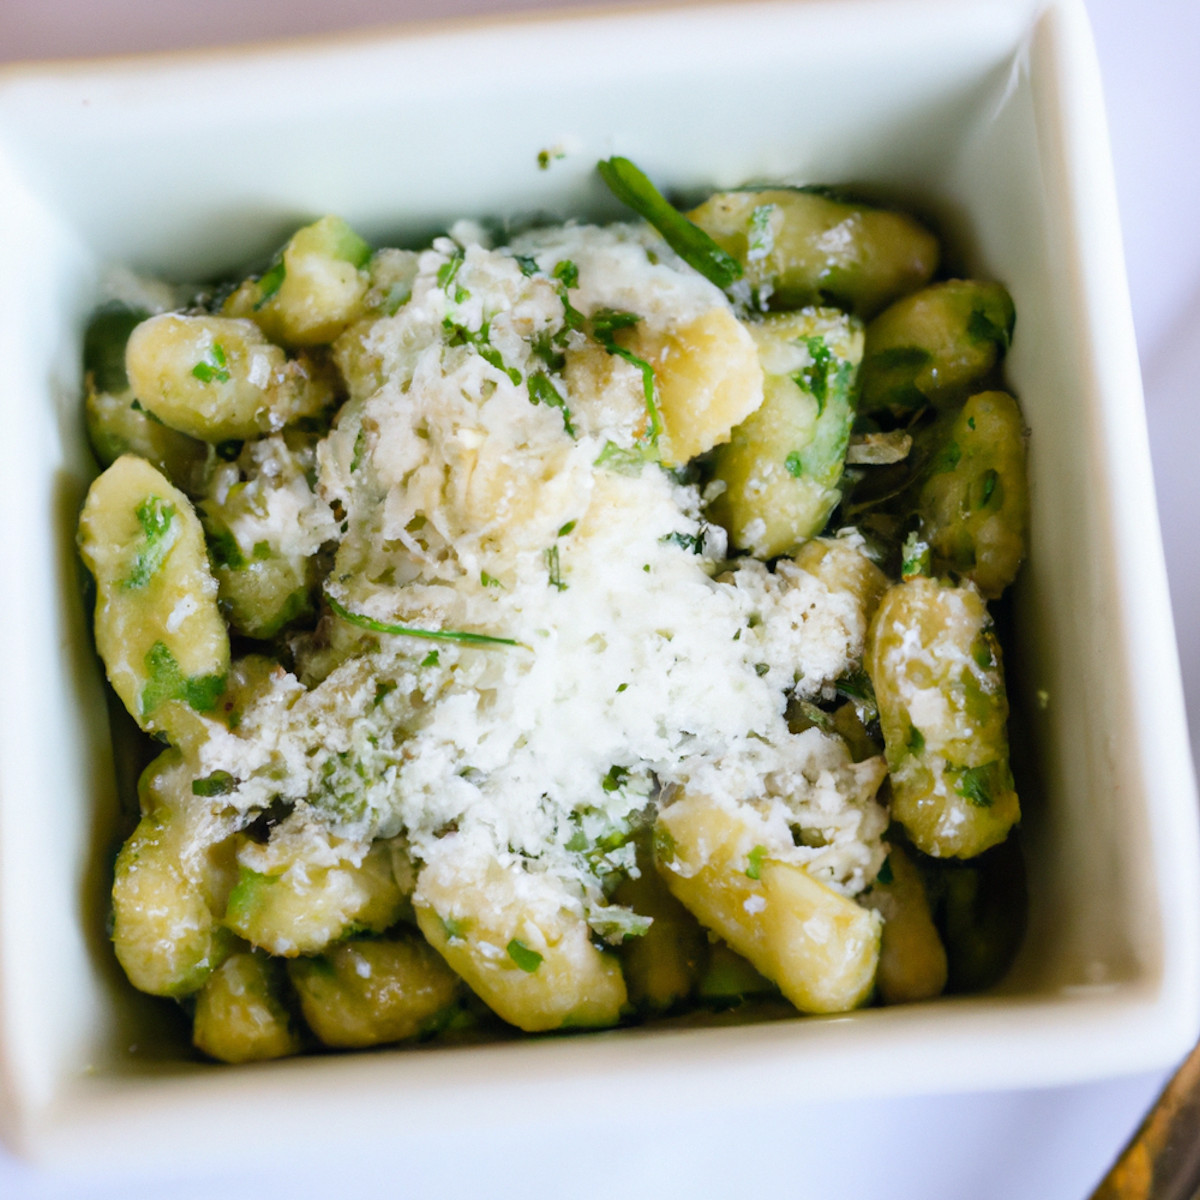 Pesto flavored gnocchi and green beans